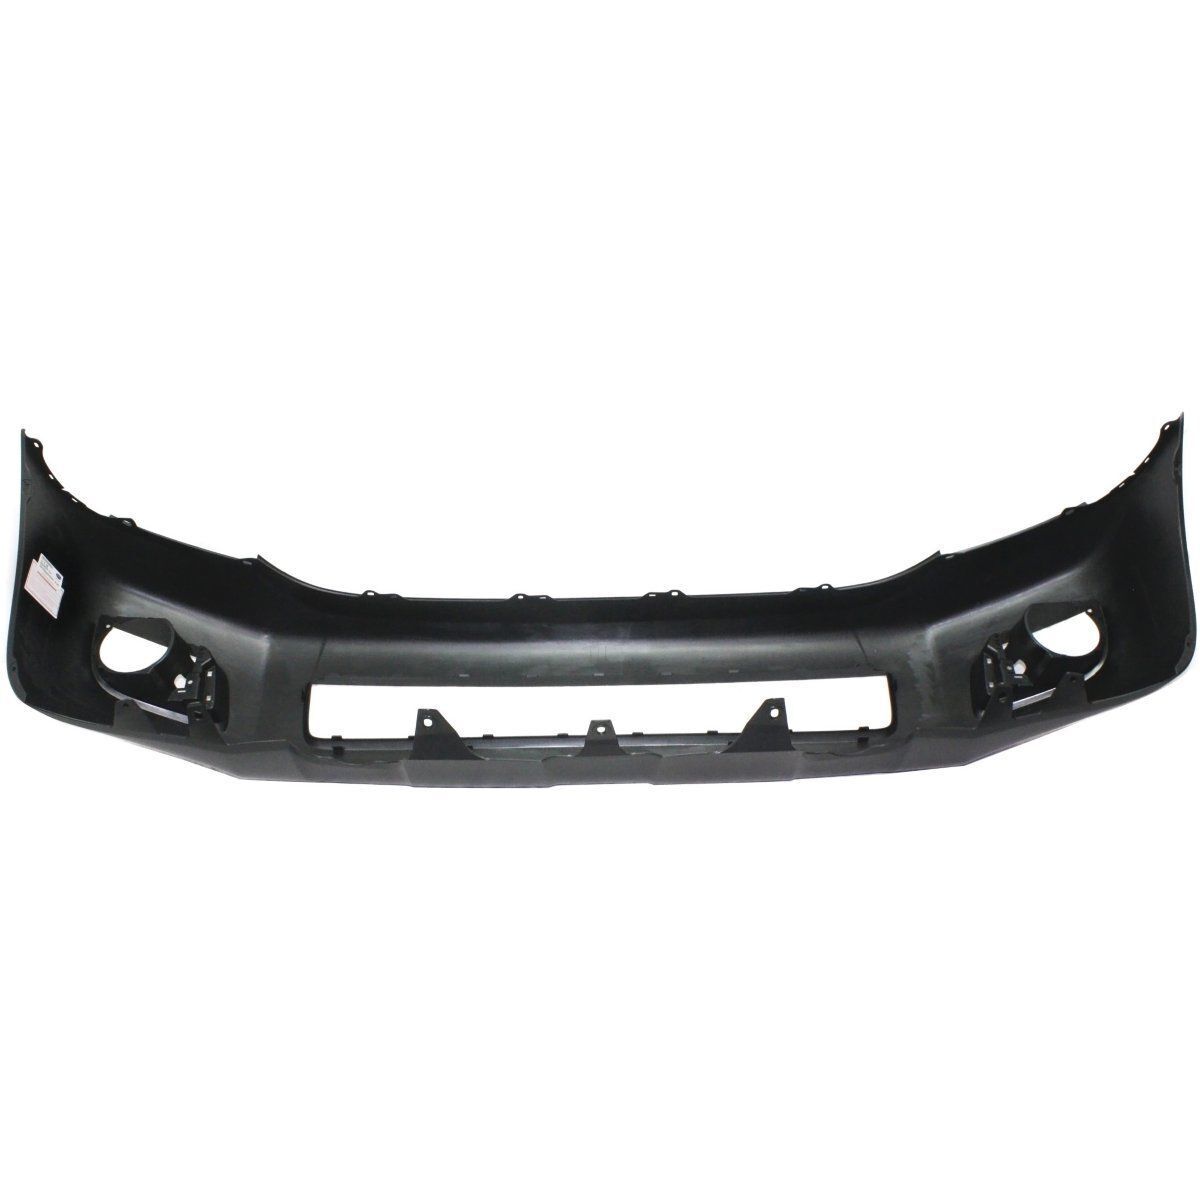 2008-2022 TOYOTA SEQUOIA; Front Bumper Cover; SR5 w/o Park Sensor Painted to Match